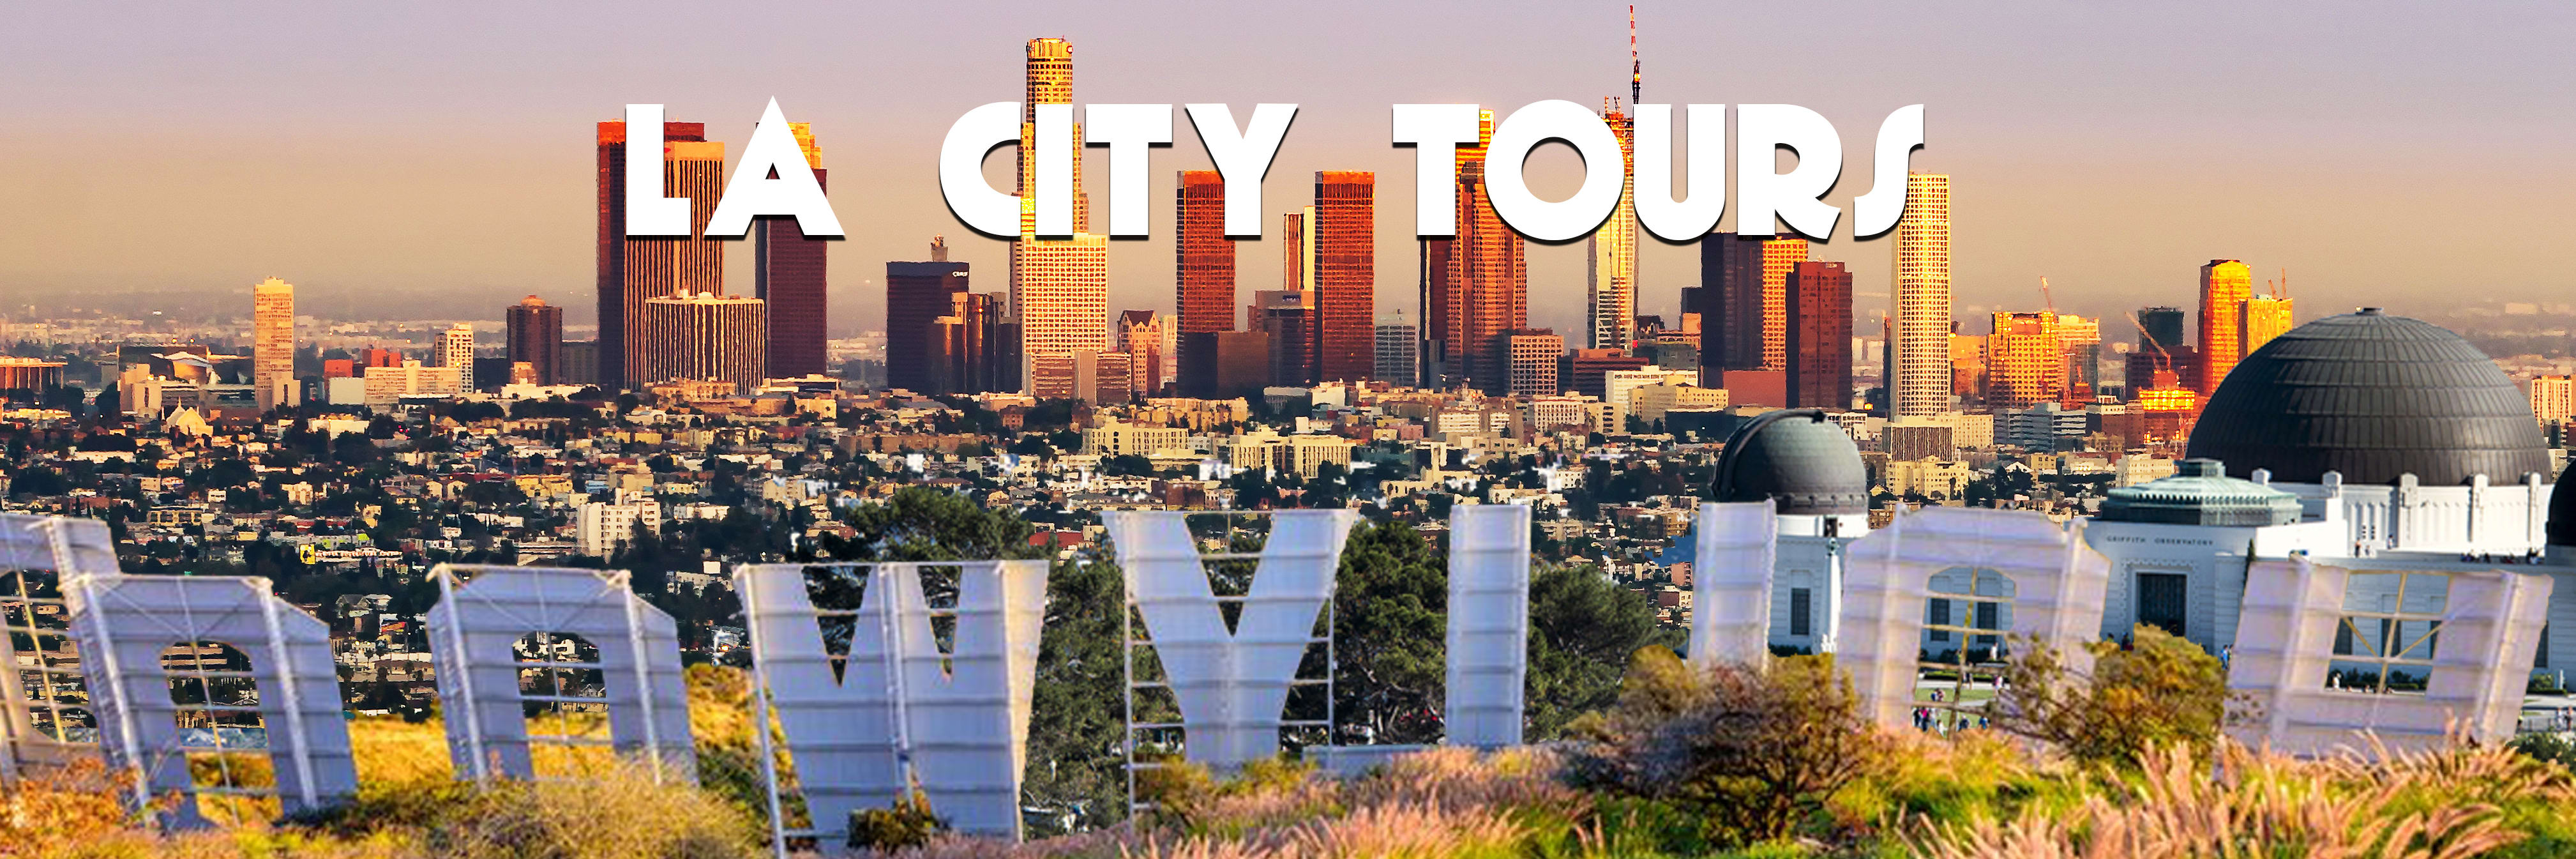 celebrity sightseeing tours los angeles